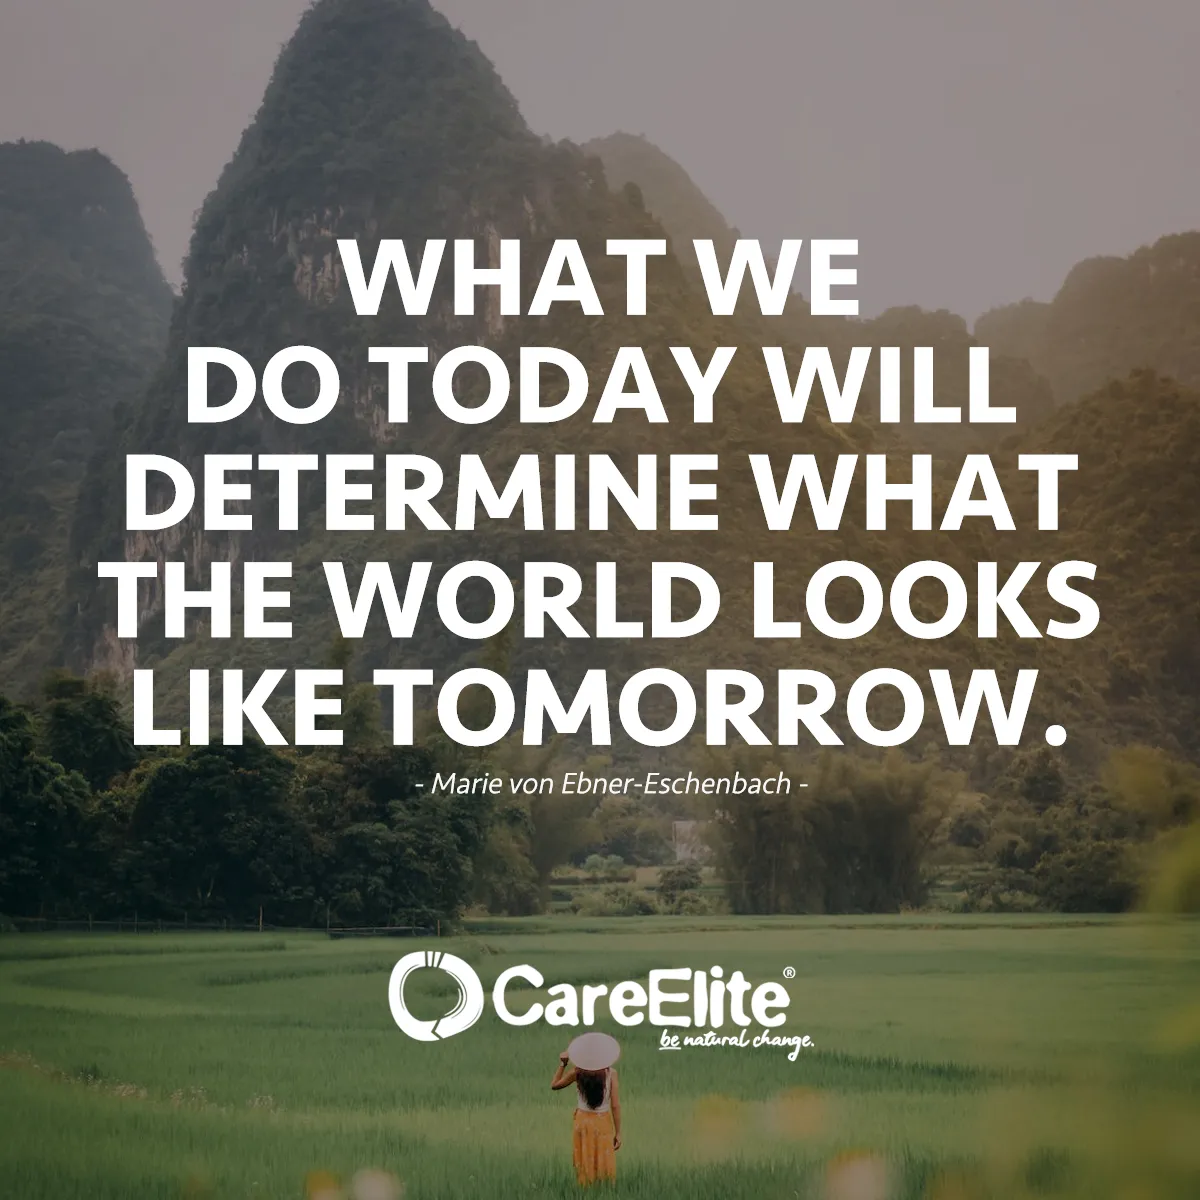 "What we do today will determine what the world looks like tomorrow." (Quote from Marie von Ebner-Eschenbach)